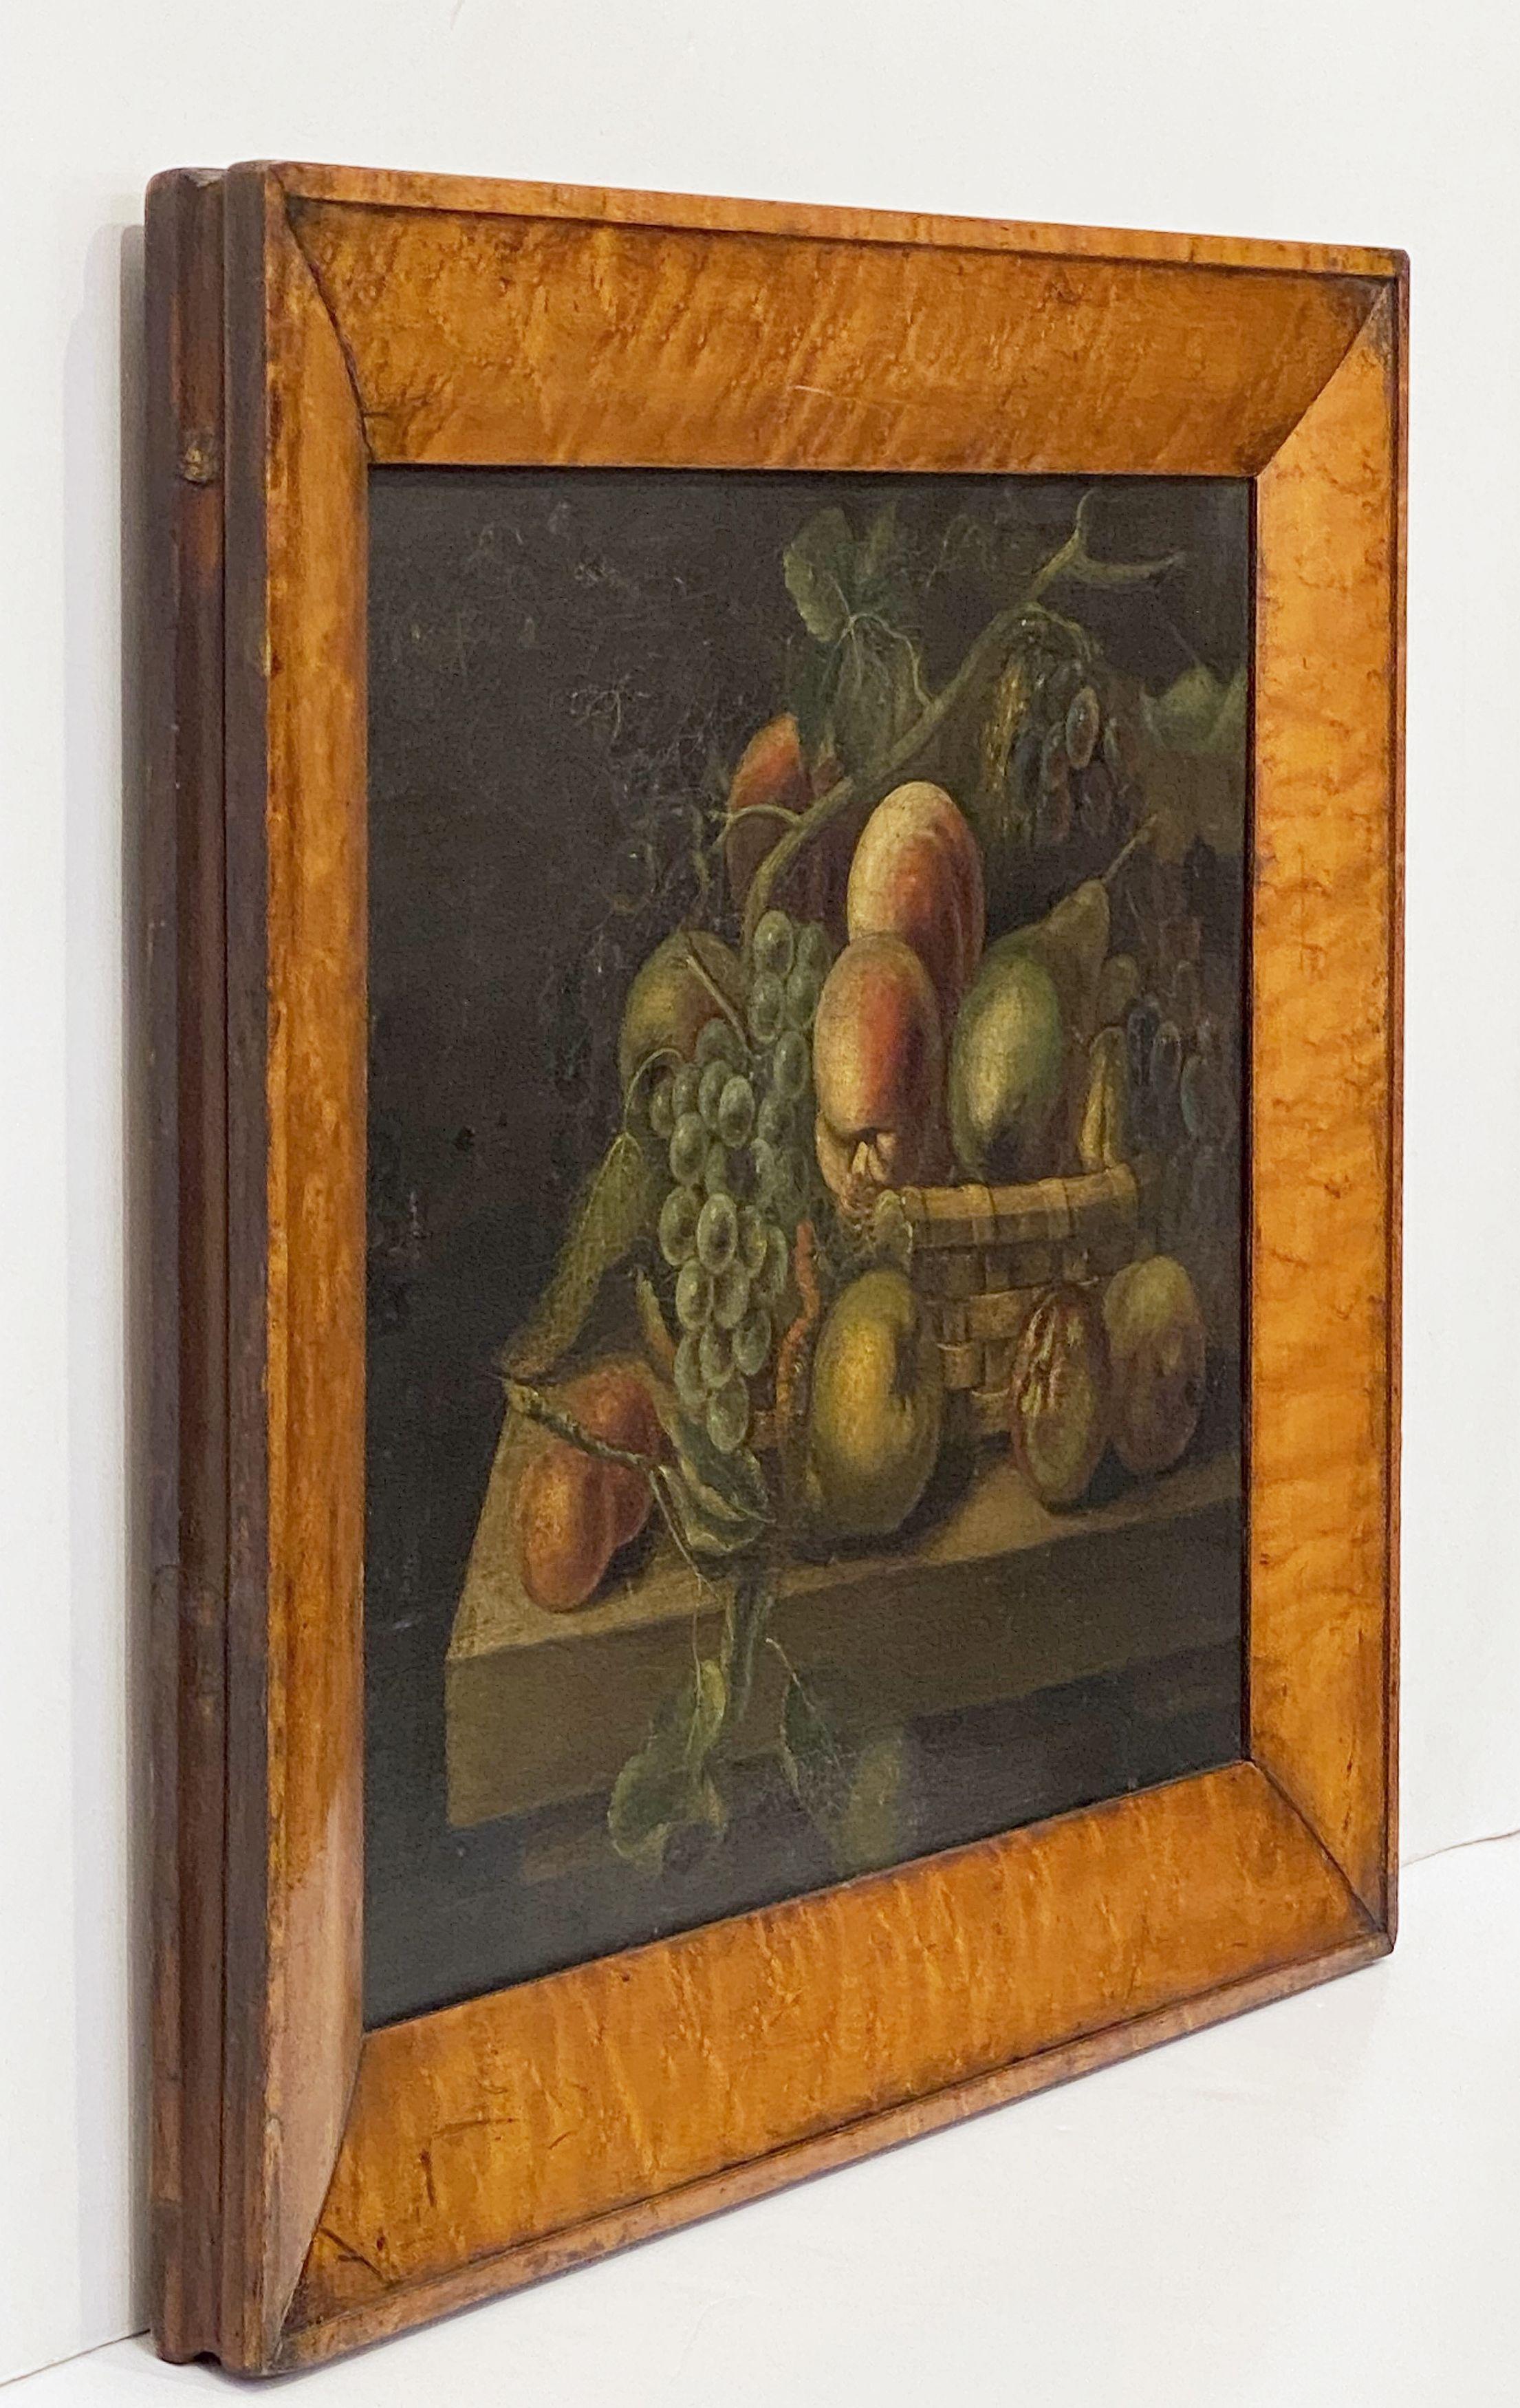 A fine English oil painting from the 19th c. in a beautifully patinated maple frame, featuring a still life of apples, pears, peaches and grapes arranged in a wicker basket. The painting is on canvas, and then mounted to board.